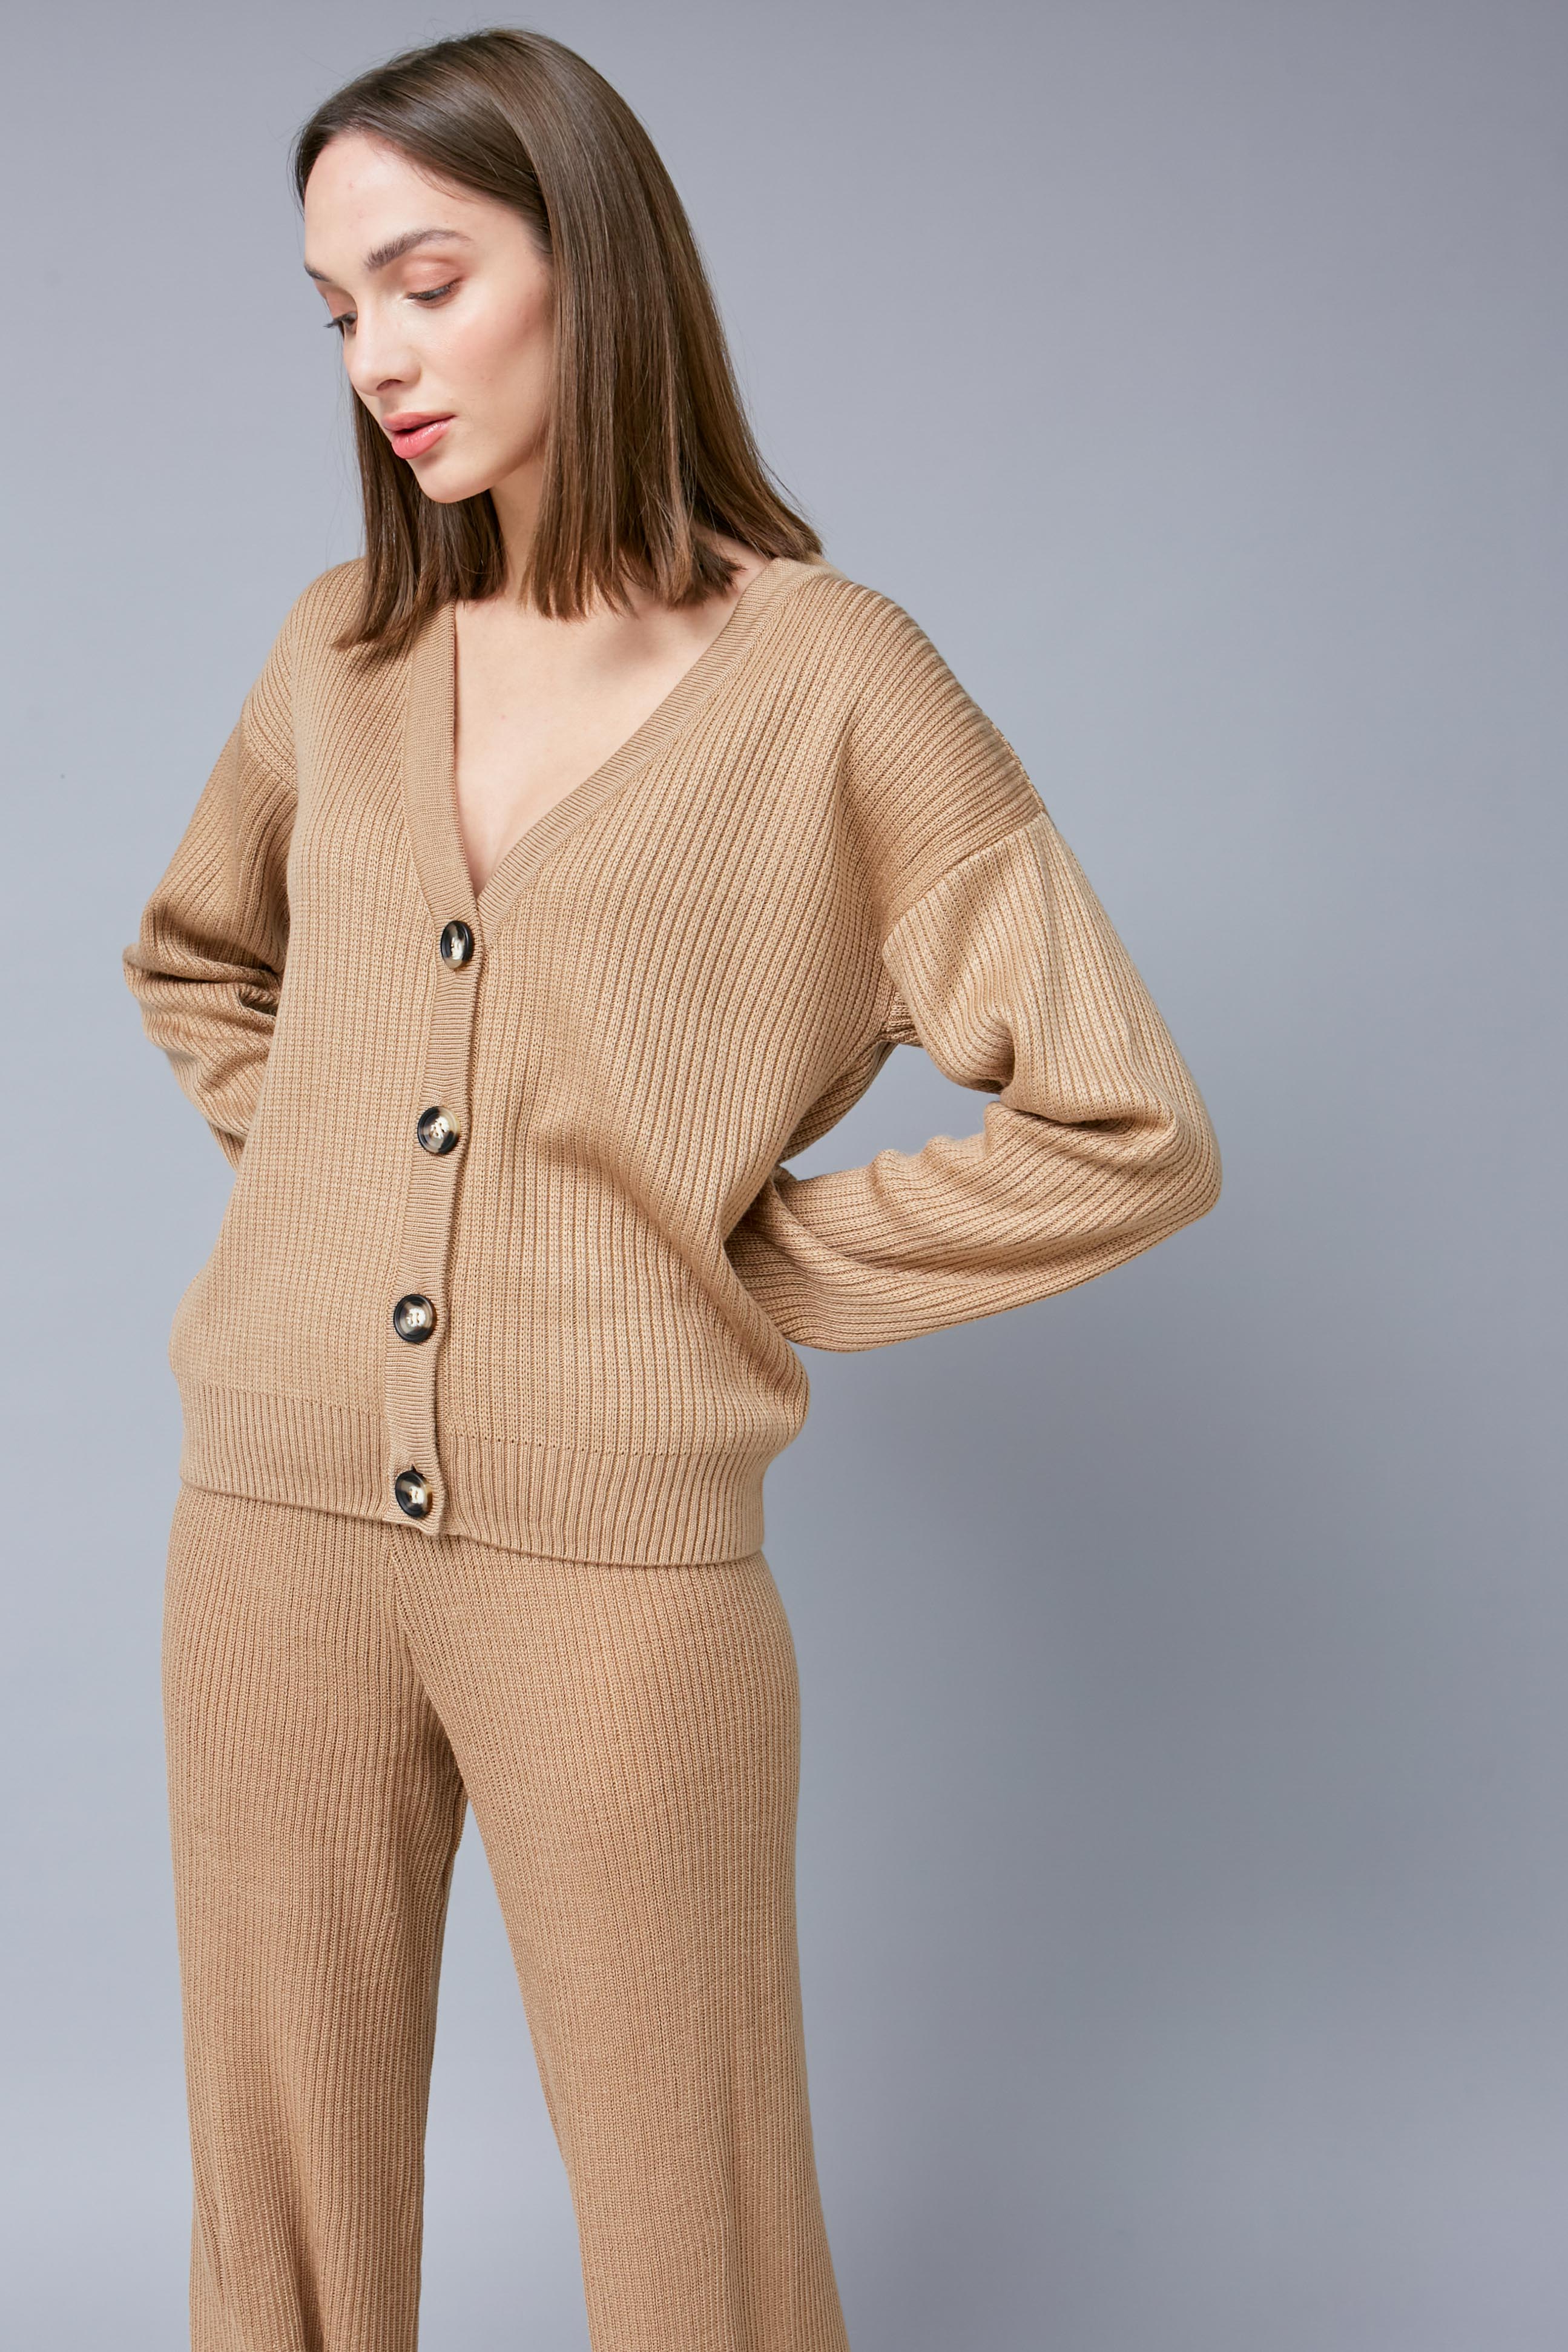 Beige knit cardigan with buttons, photo 1